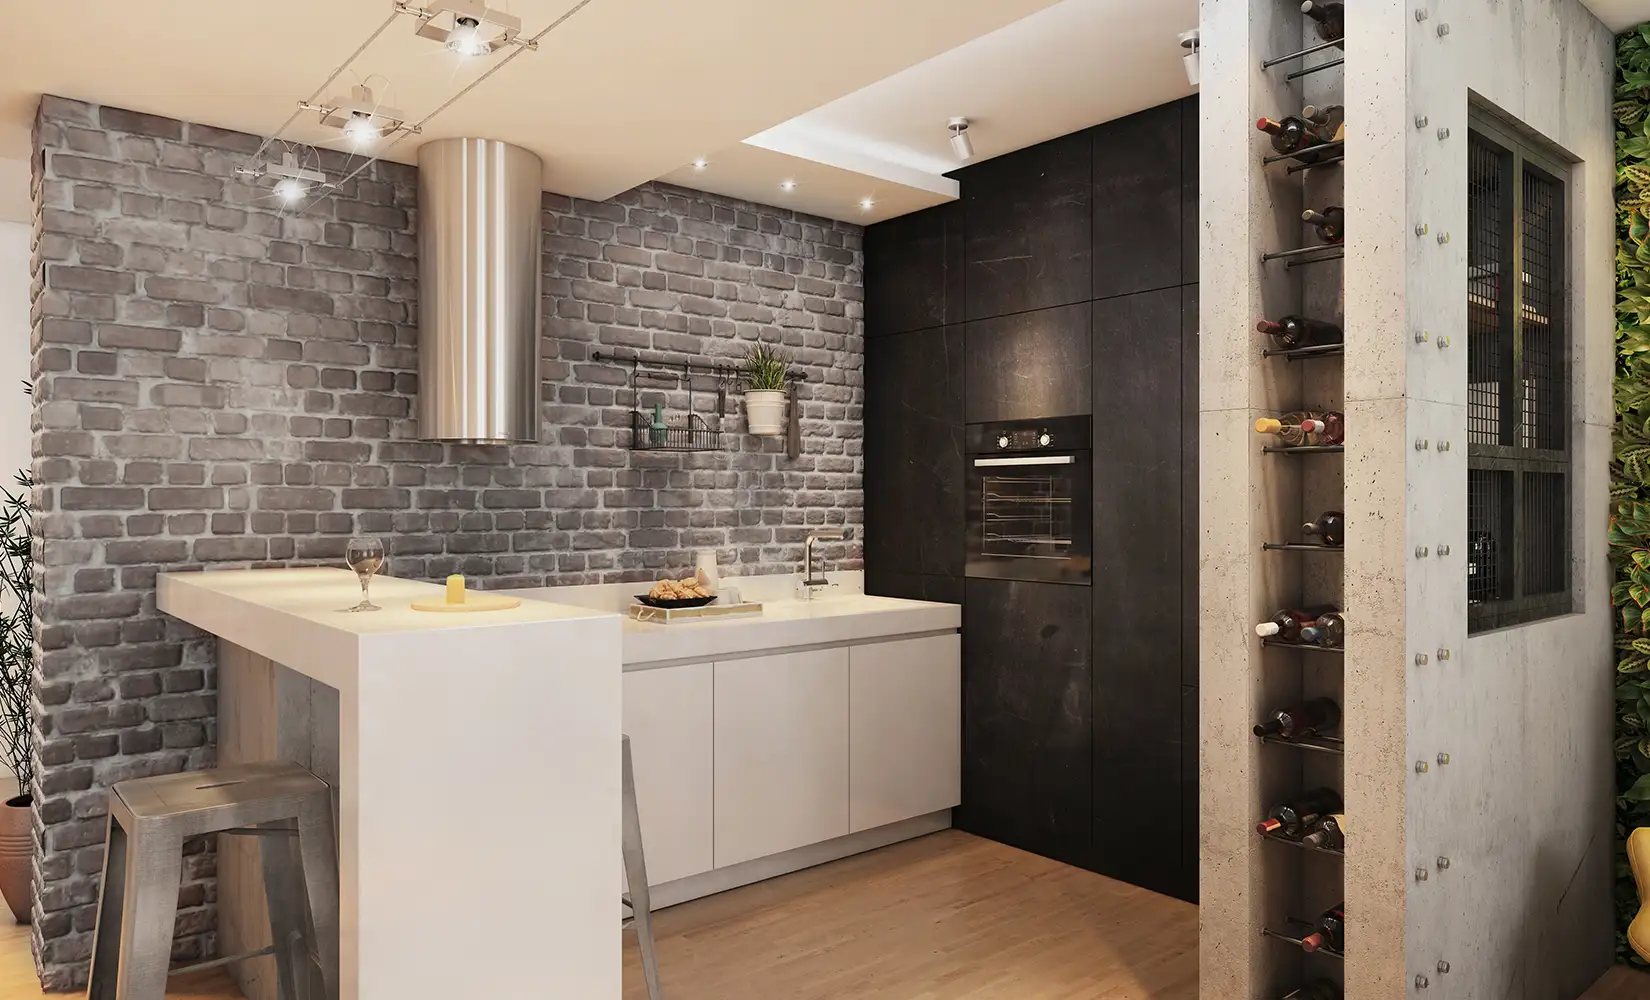 Industrial kitchen with light wood cabinets, stainless steel appliances, and gray brick backsplash.